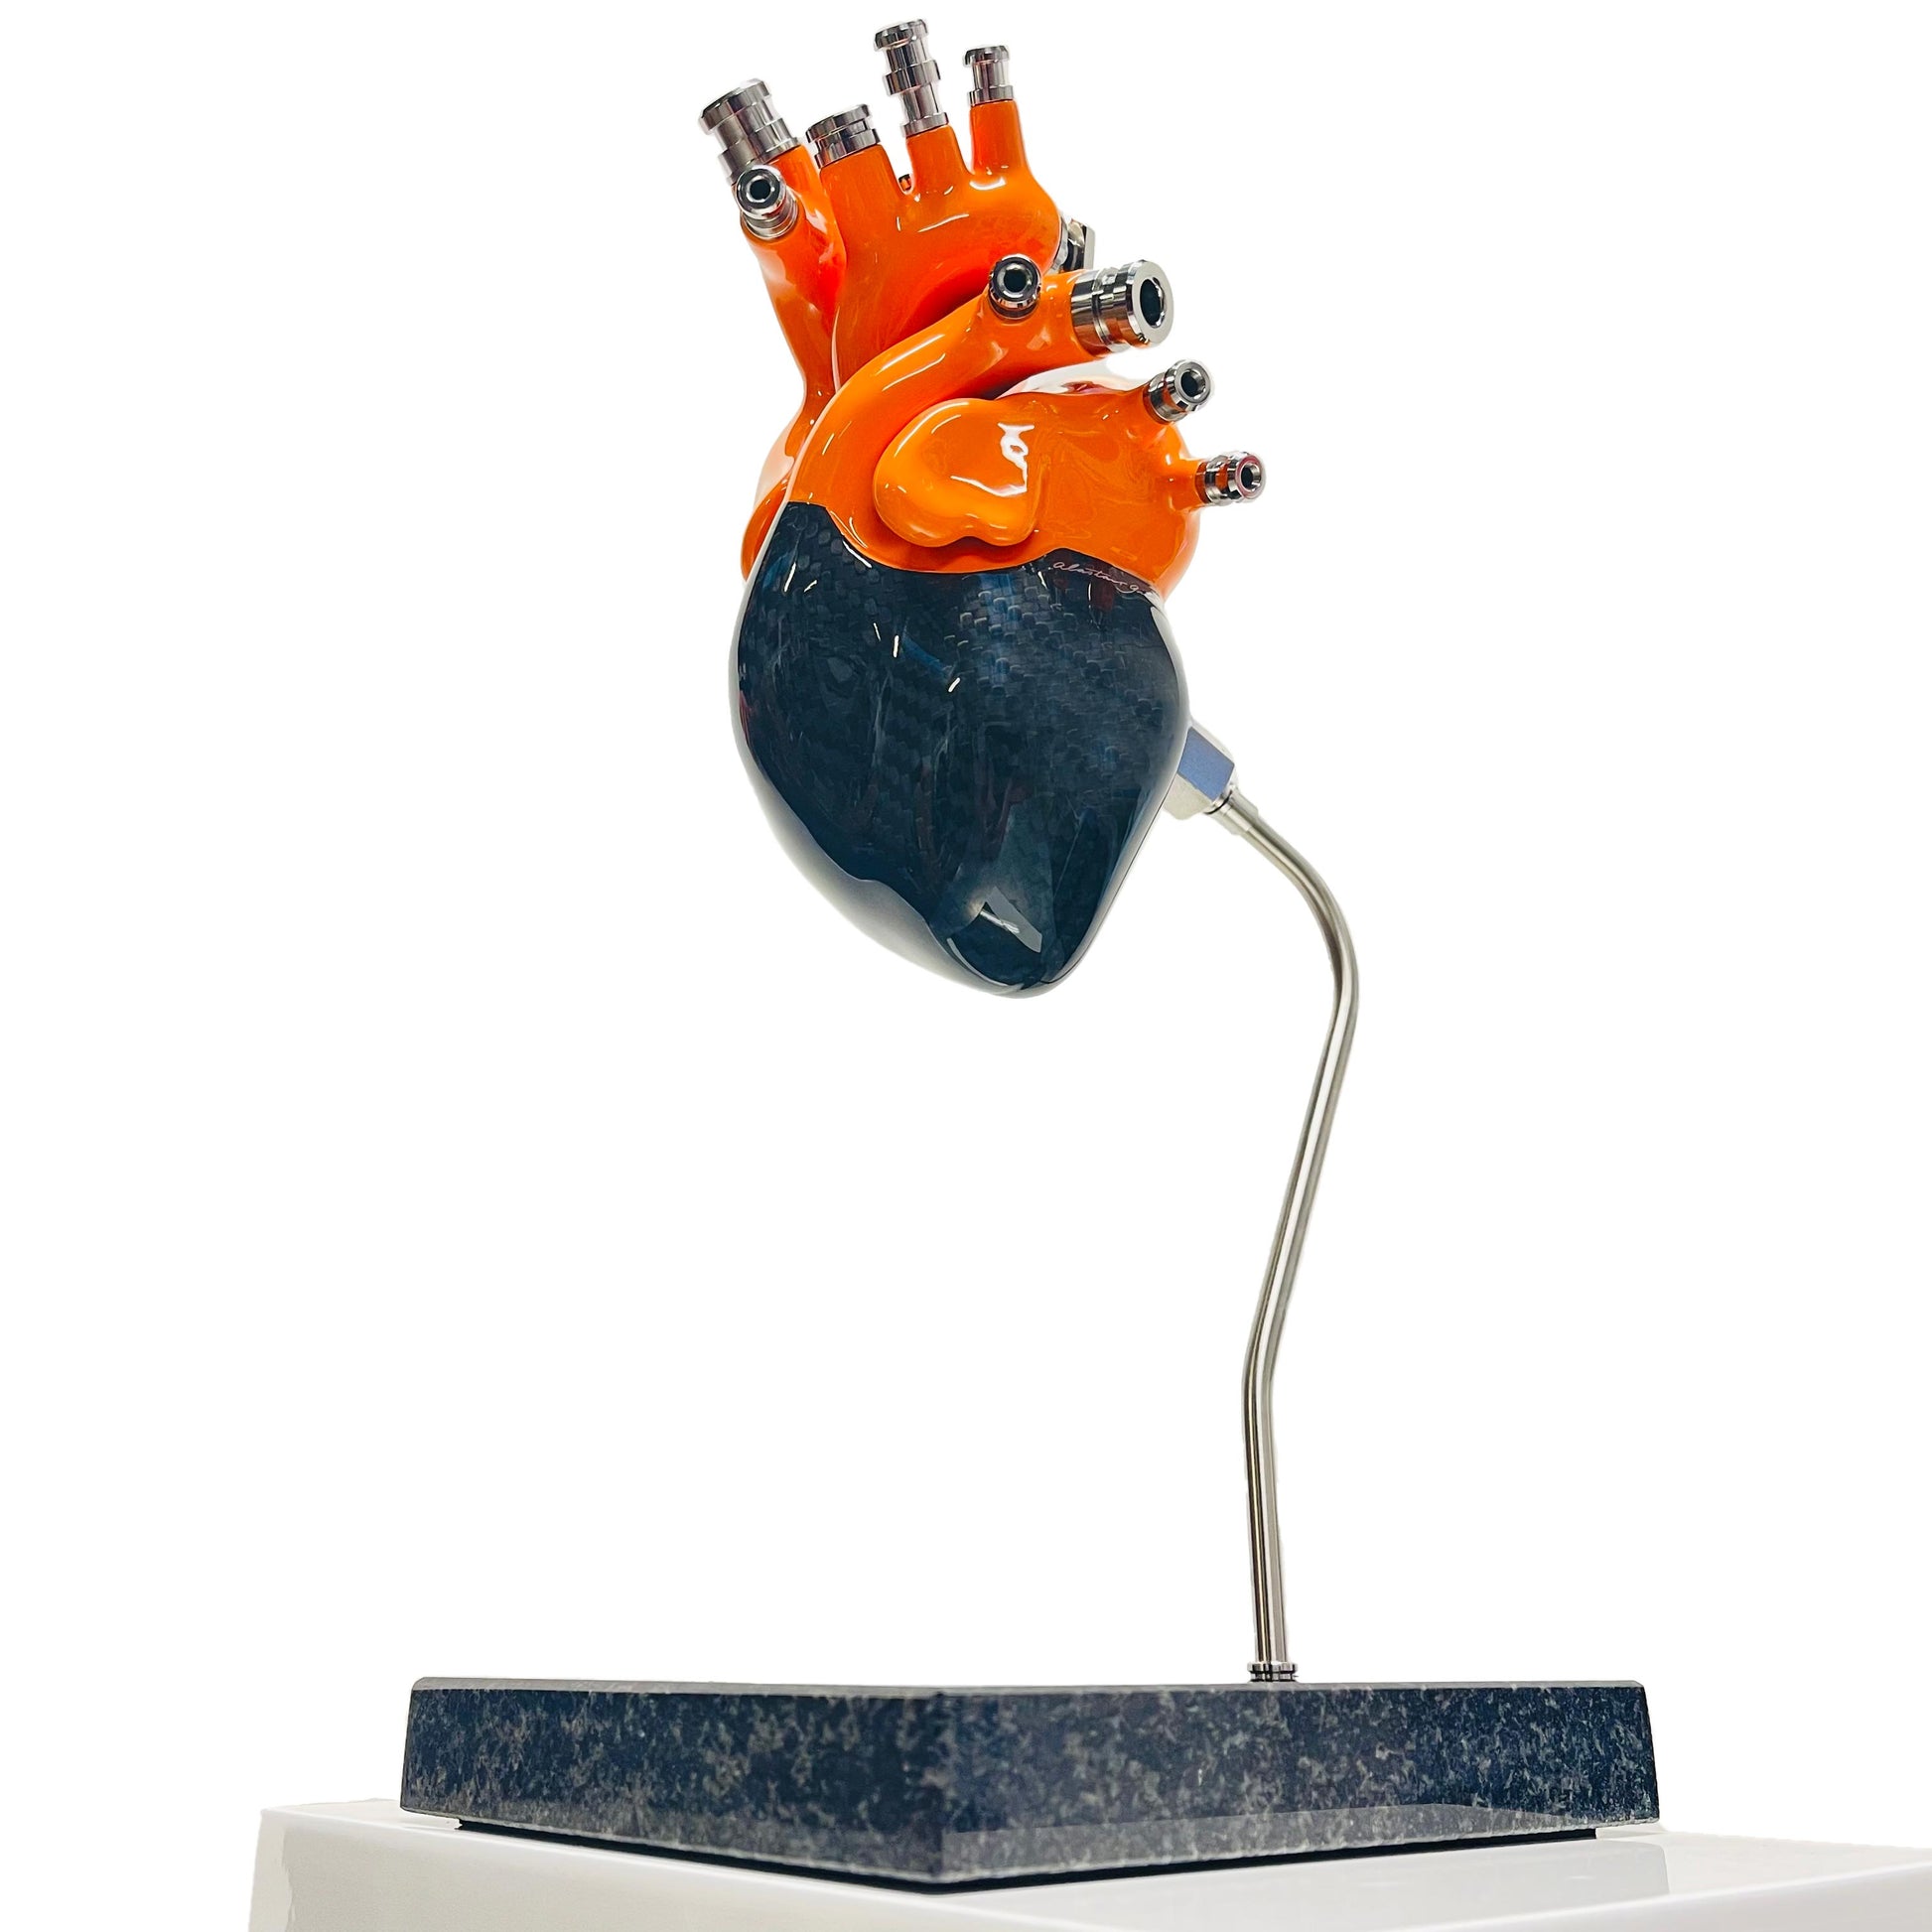 Carbon fibre Human Heart with Orange painted detail on a granite base